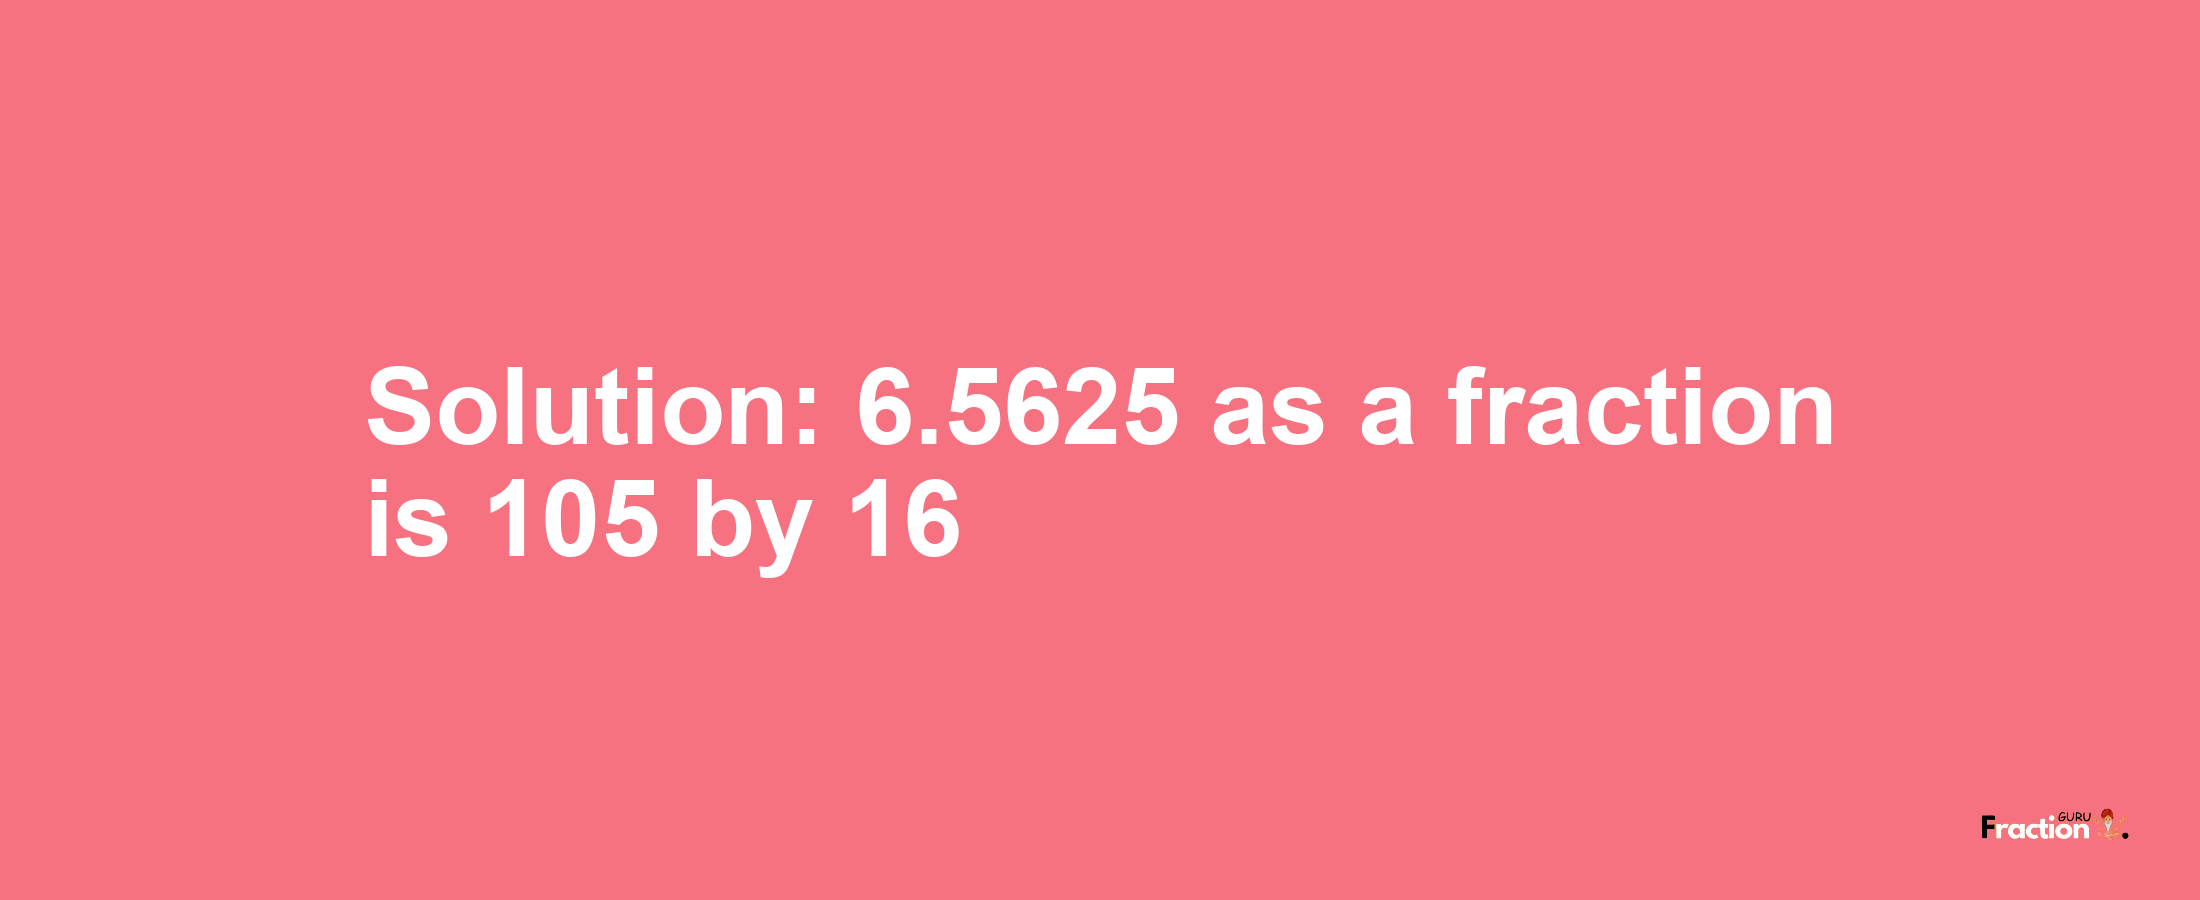 Solution:6.5625 as a fraction is 105/16